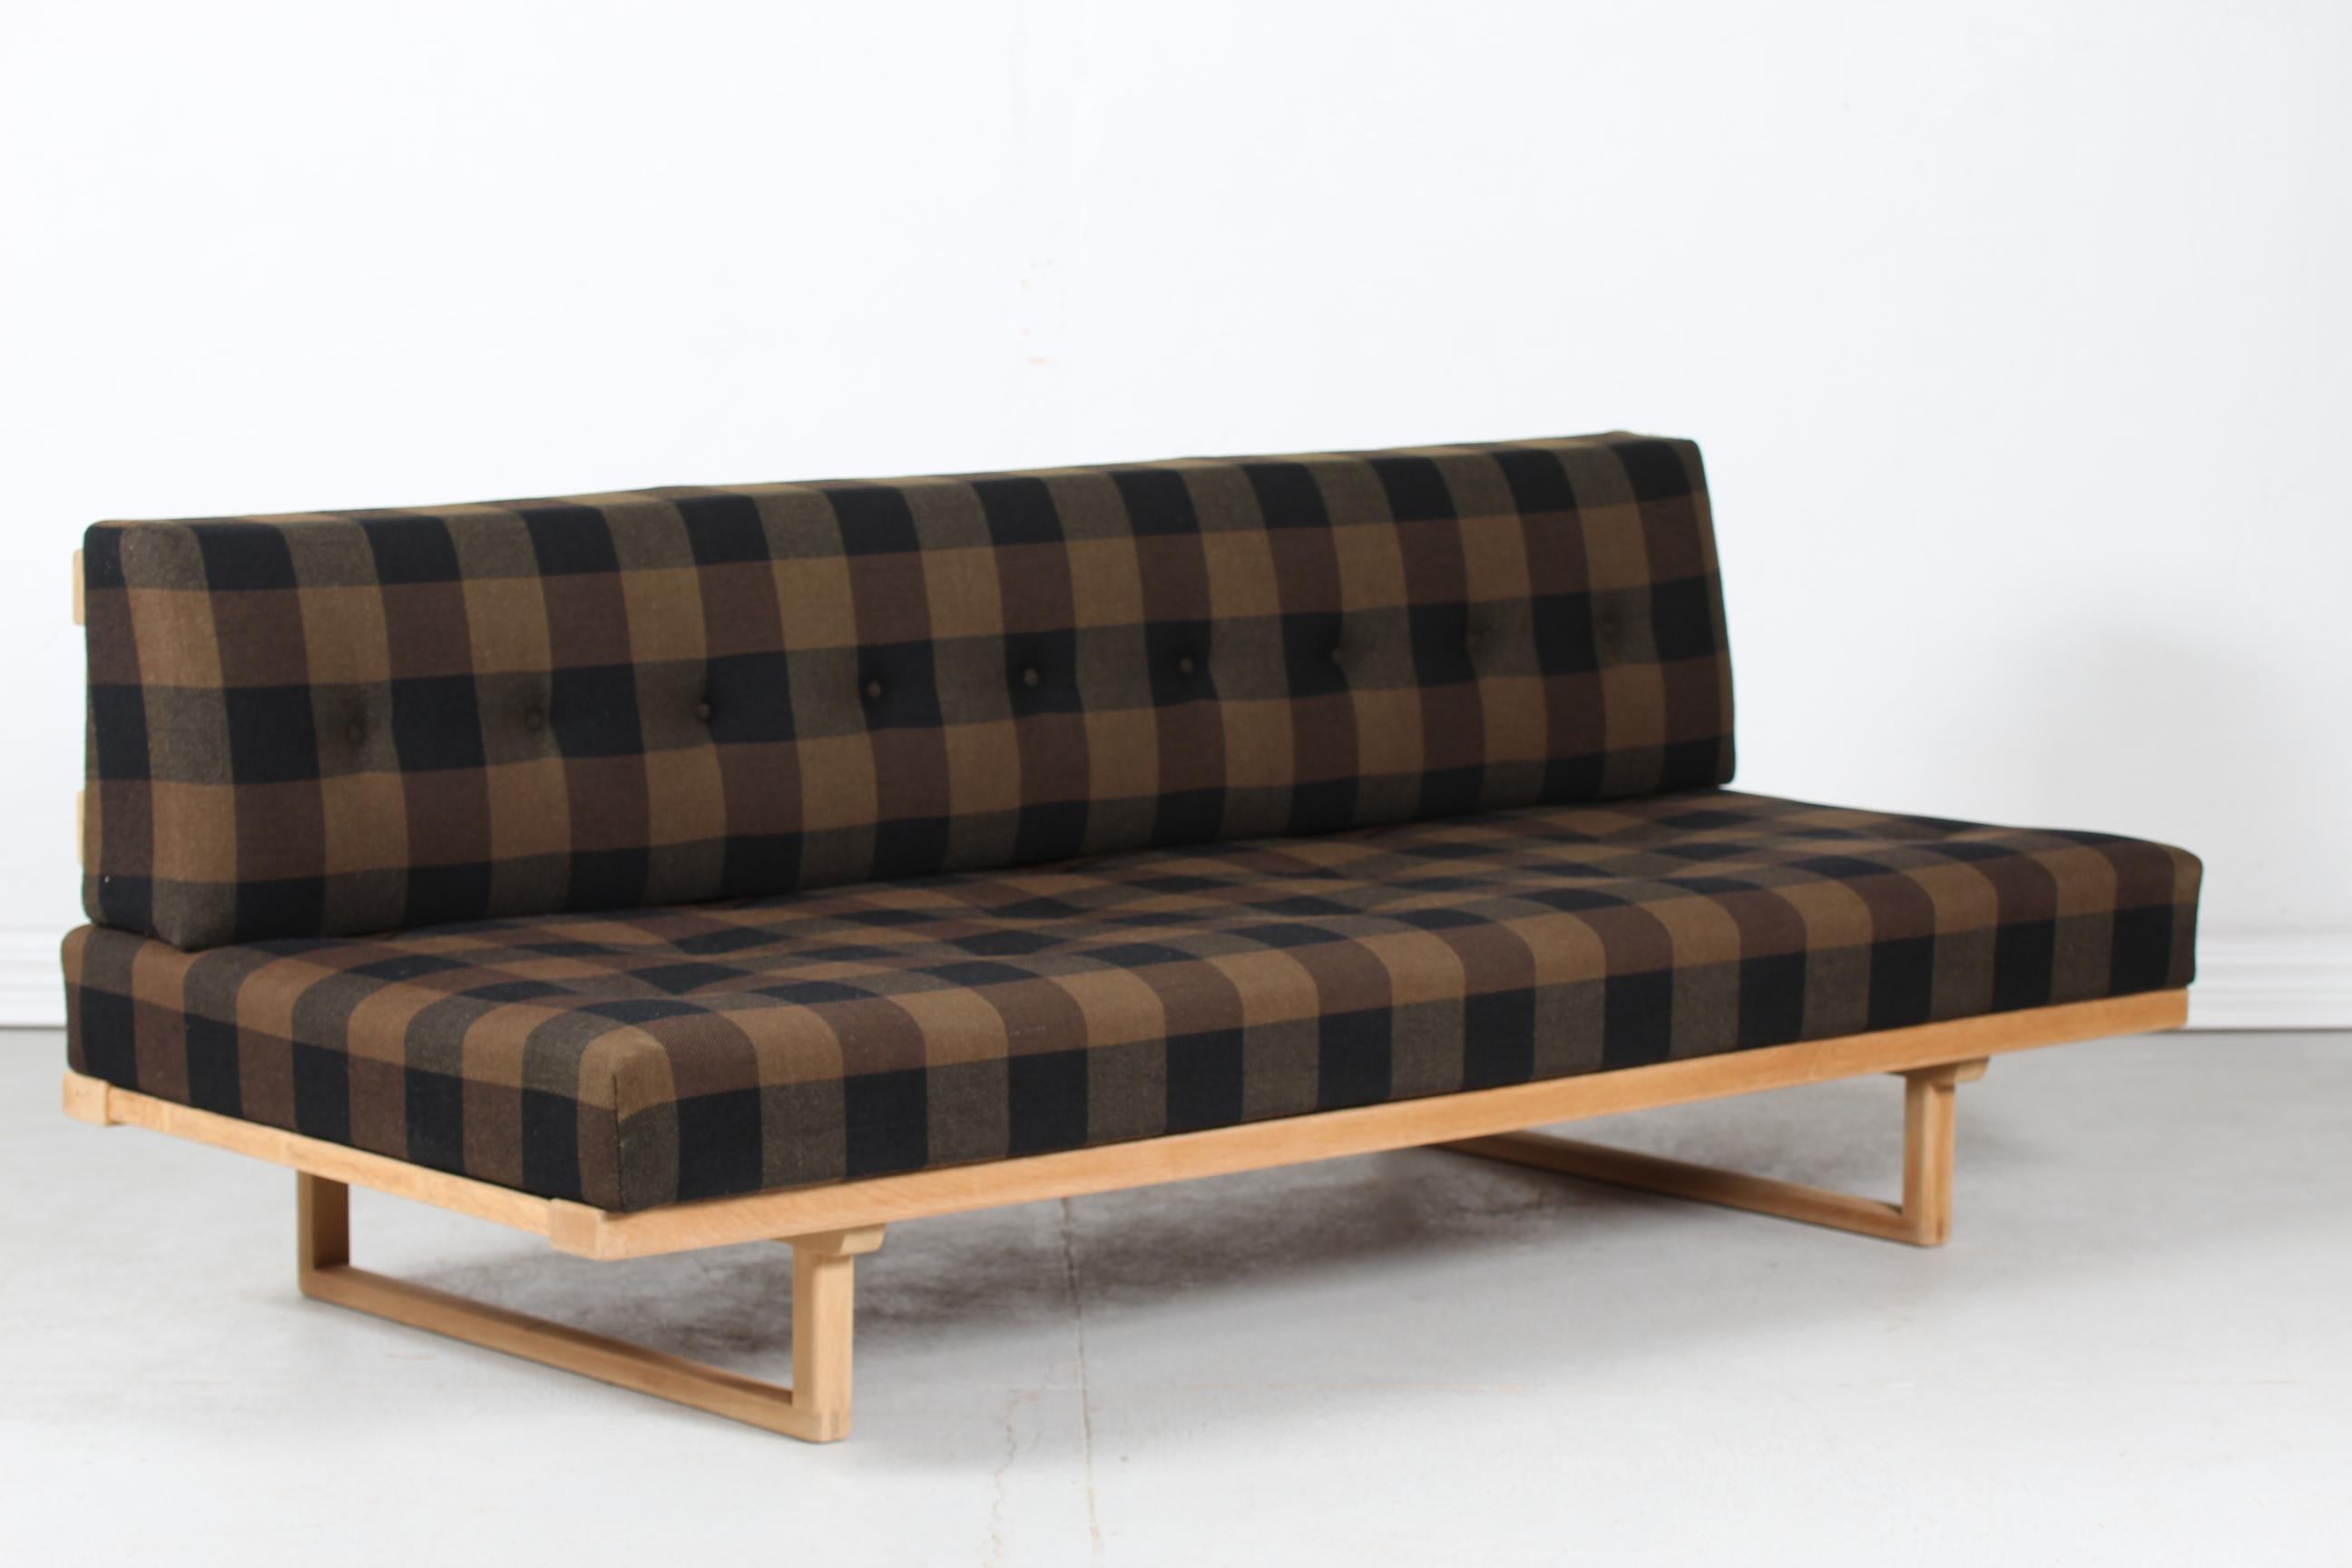 Danish vintage Børge Mogensen (1914-1971) daybed model no. 4312.
All loose cushions are upholstered with the original brown checkered wool. 
The frame and legs are made of solid oak with soap treatment and the slats are made of ash.

The daybed